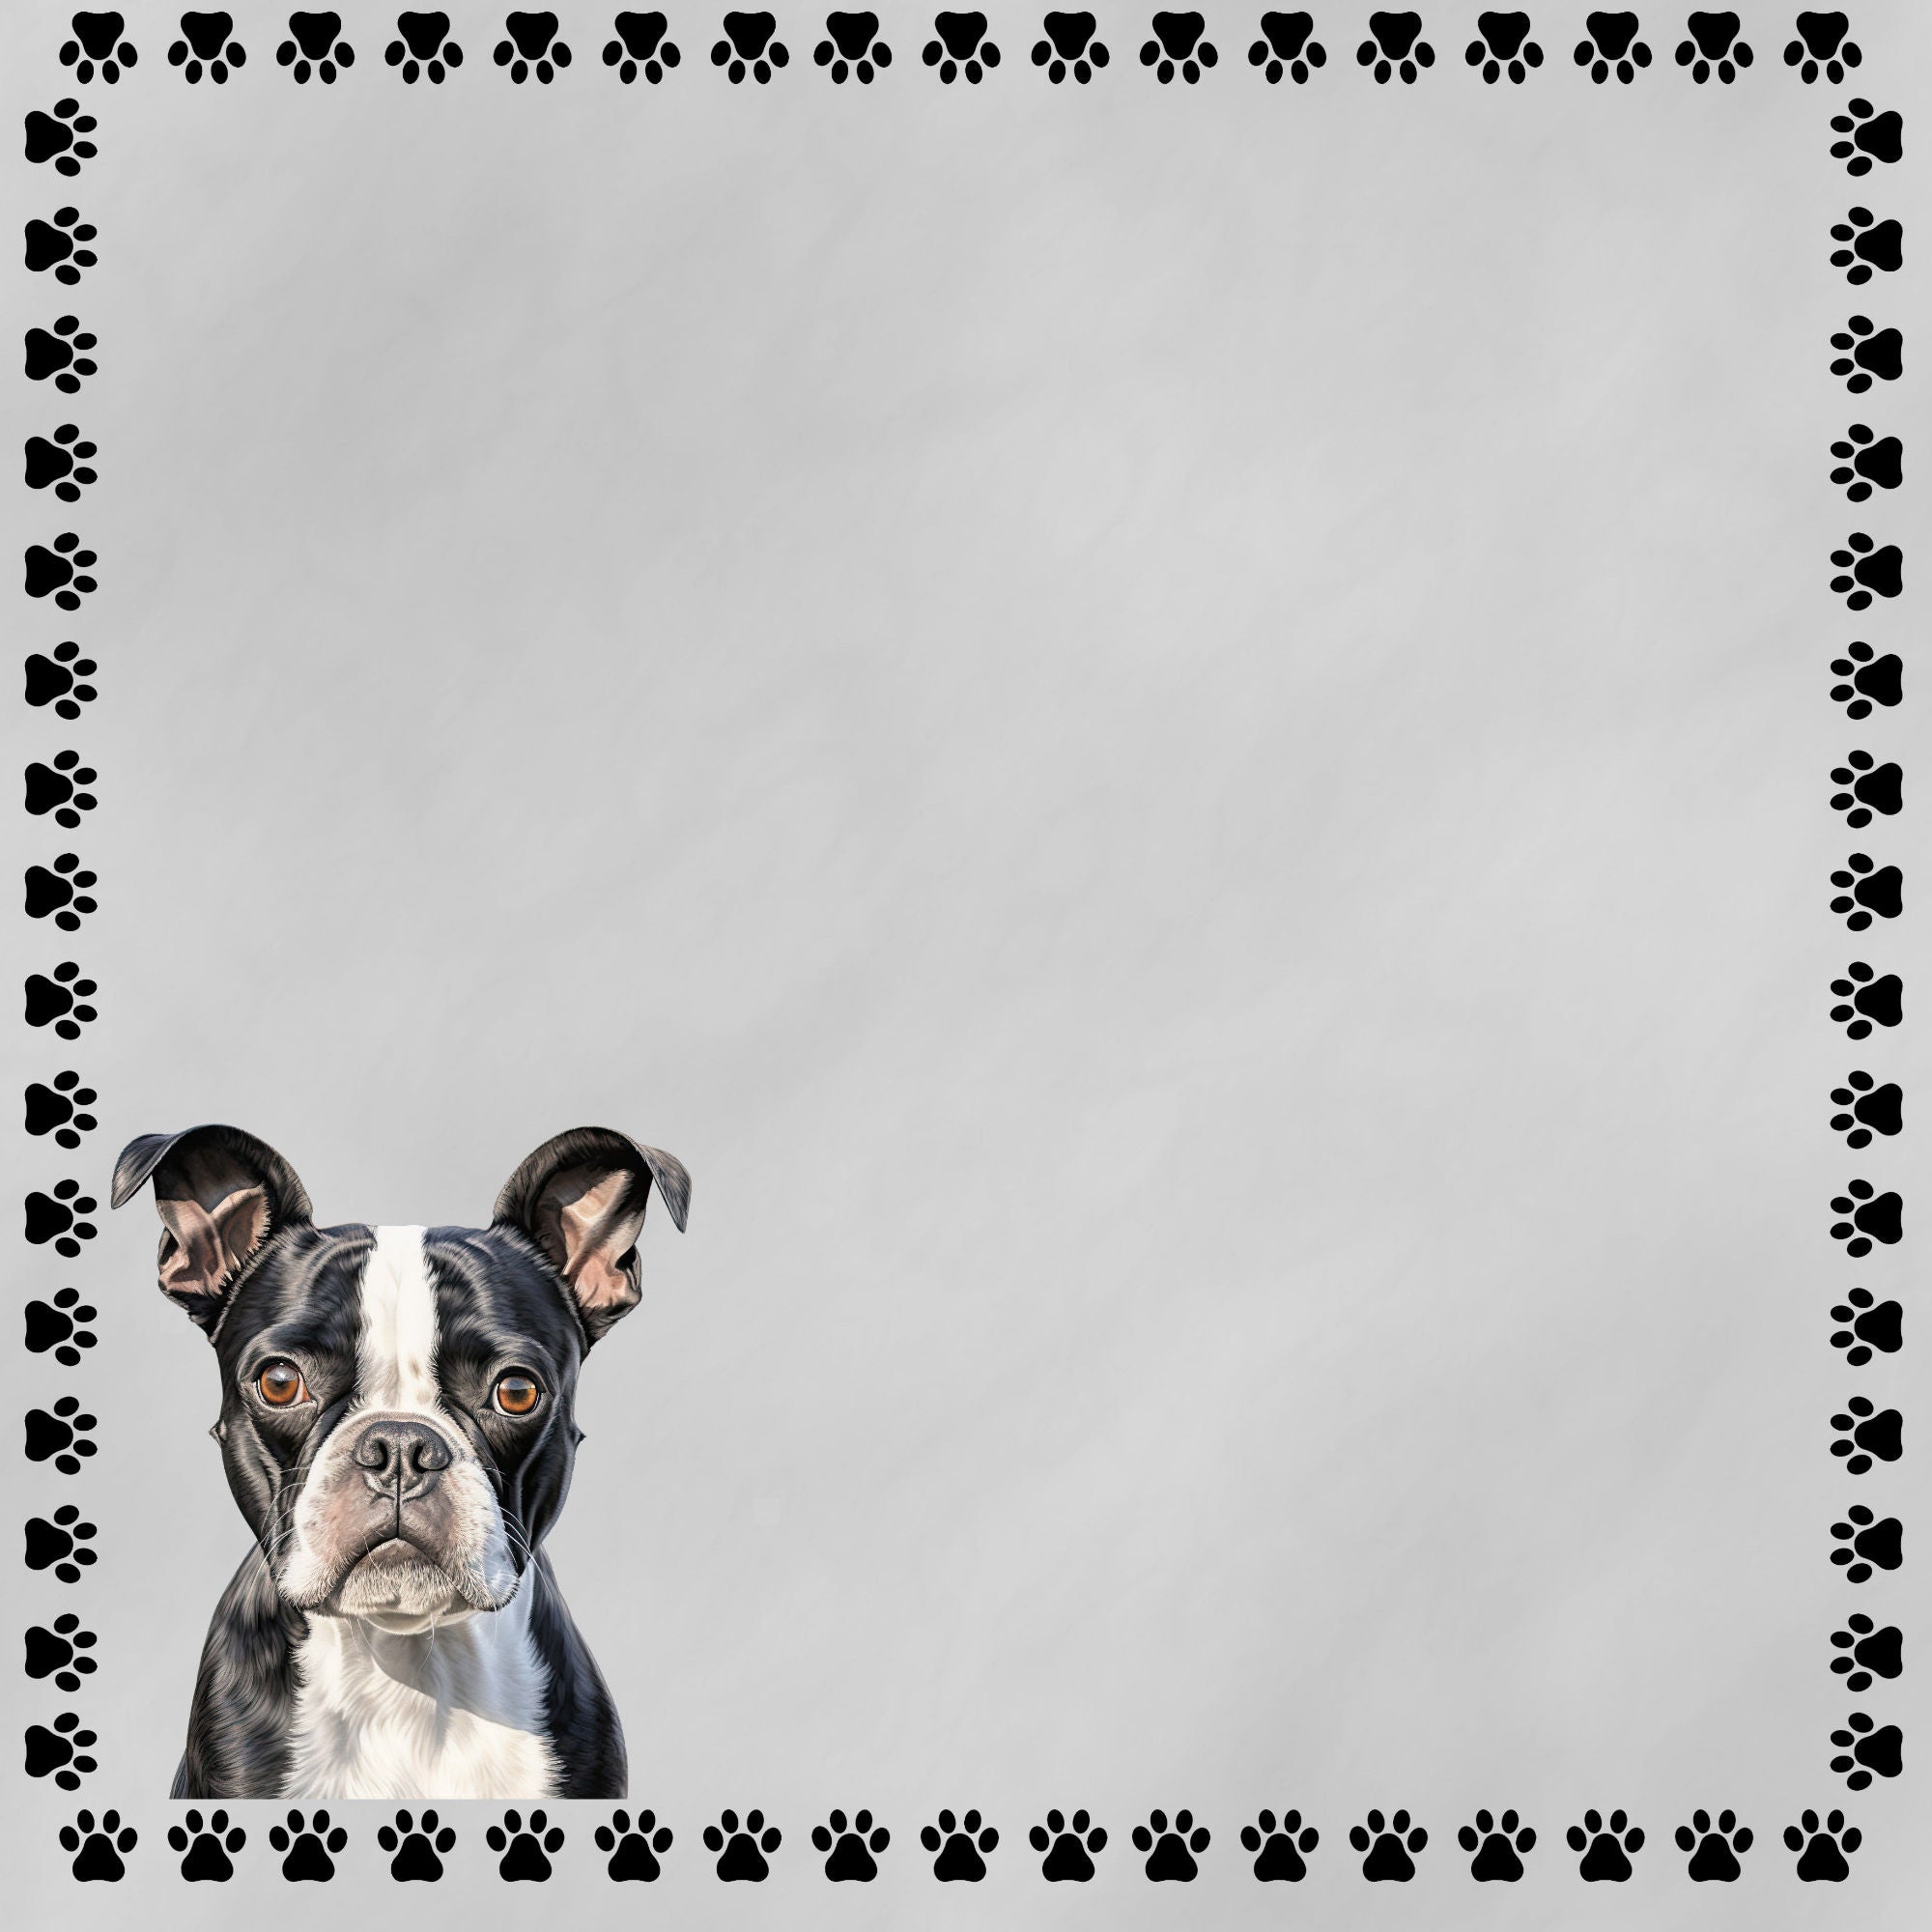 Dog Breeds Collection Boston Terrier 12 x 12 Double-Sided Scrapbook Paper by SSC Designs